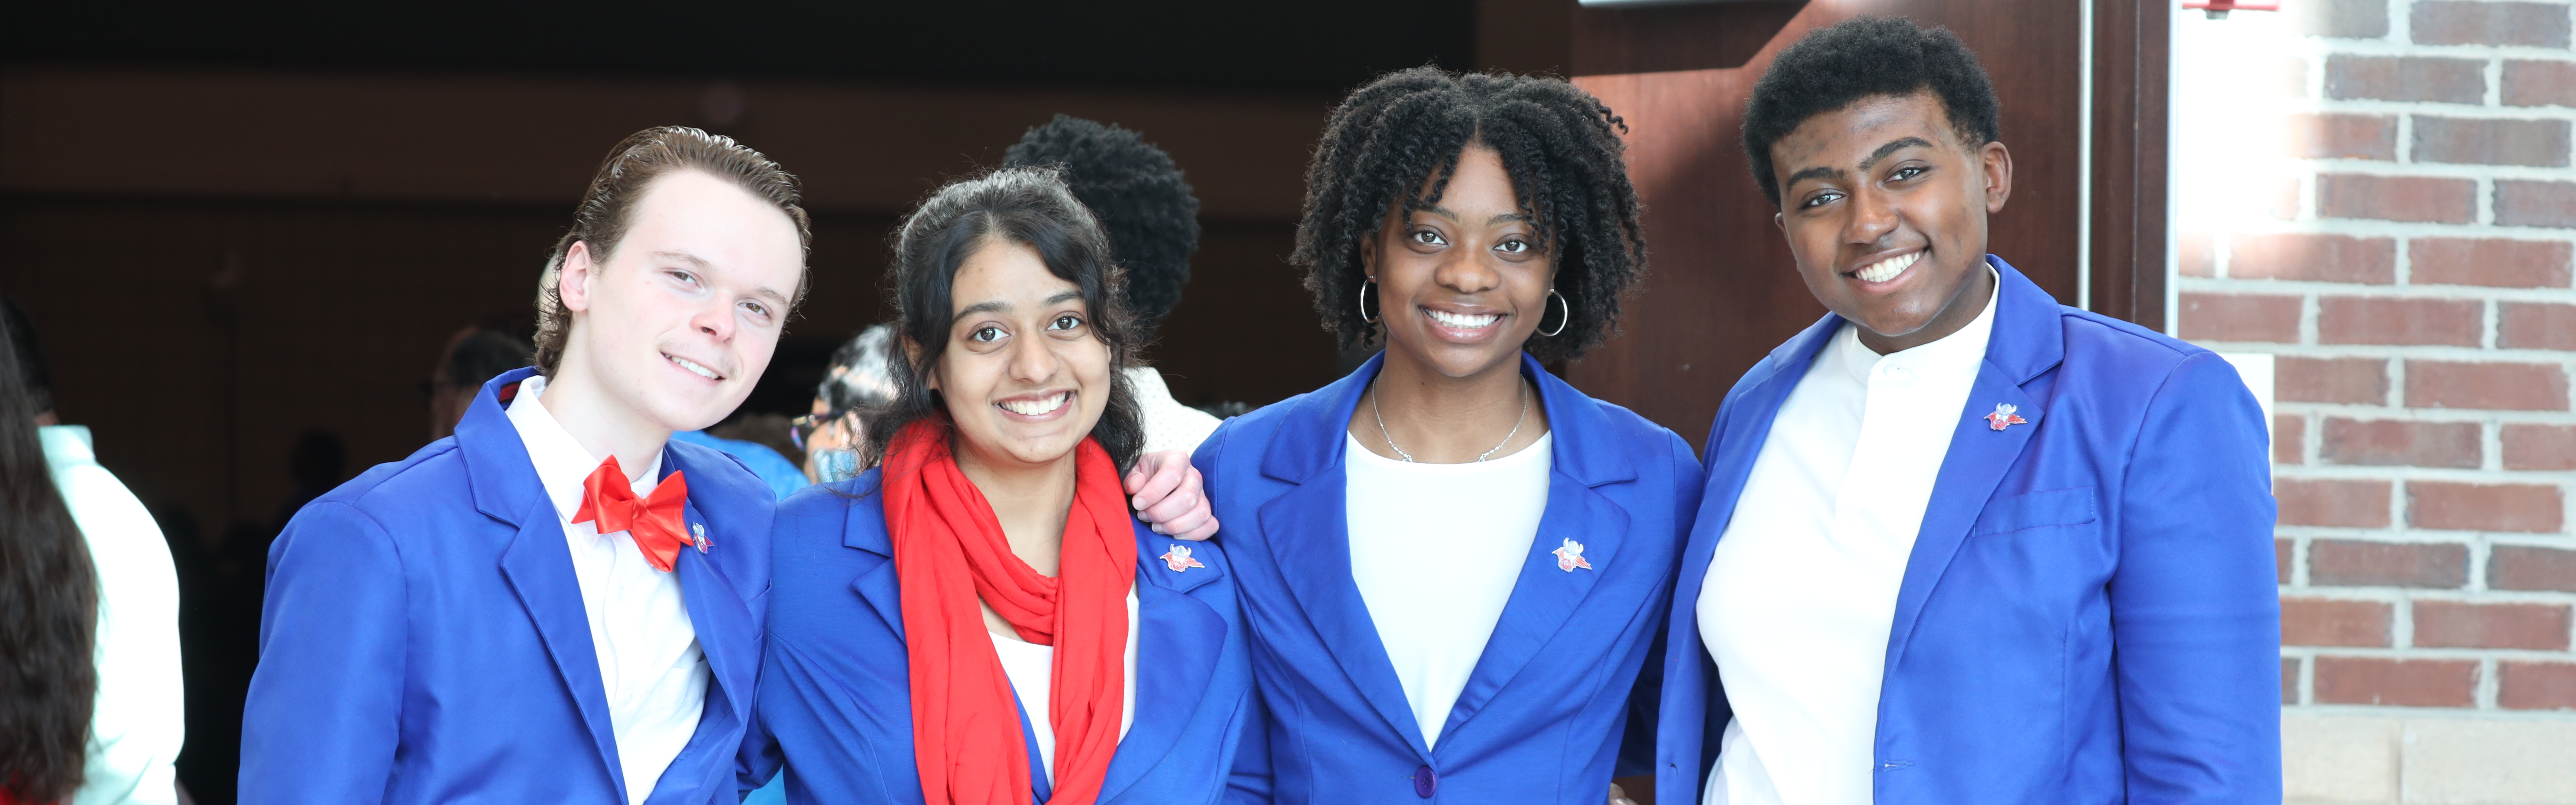 Two male and two female high school students pose for a group photo while wearing royal blue blazers and standing in a doorway.